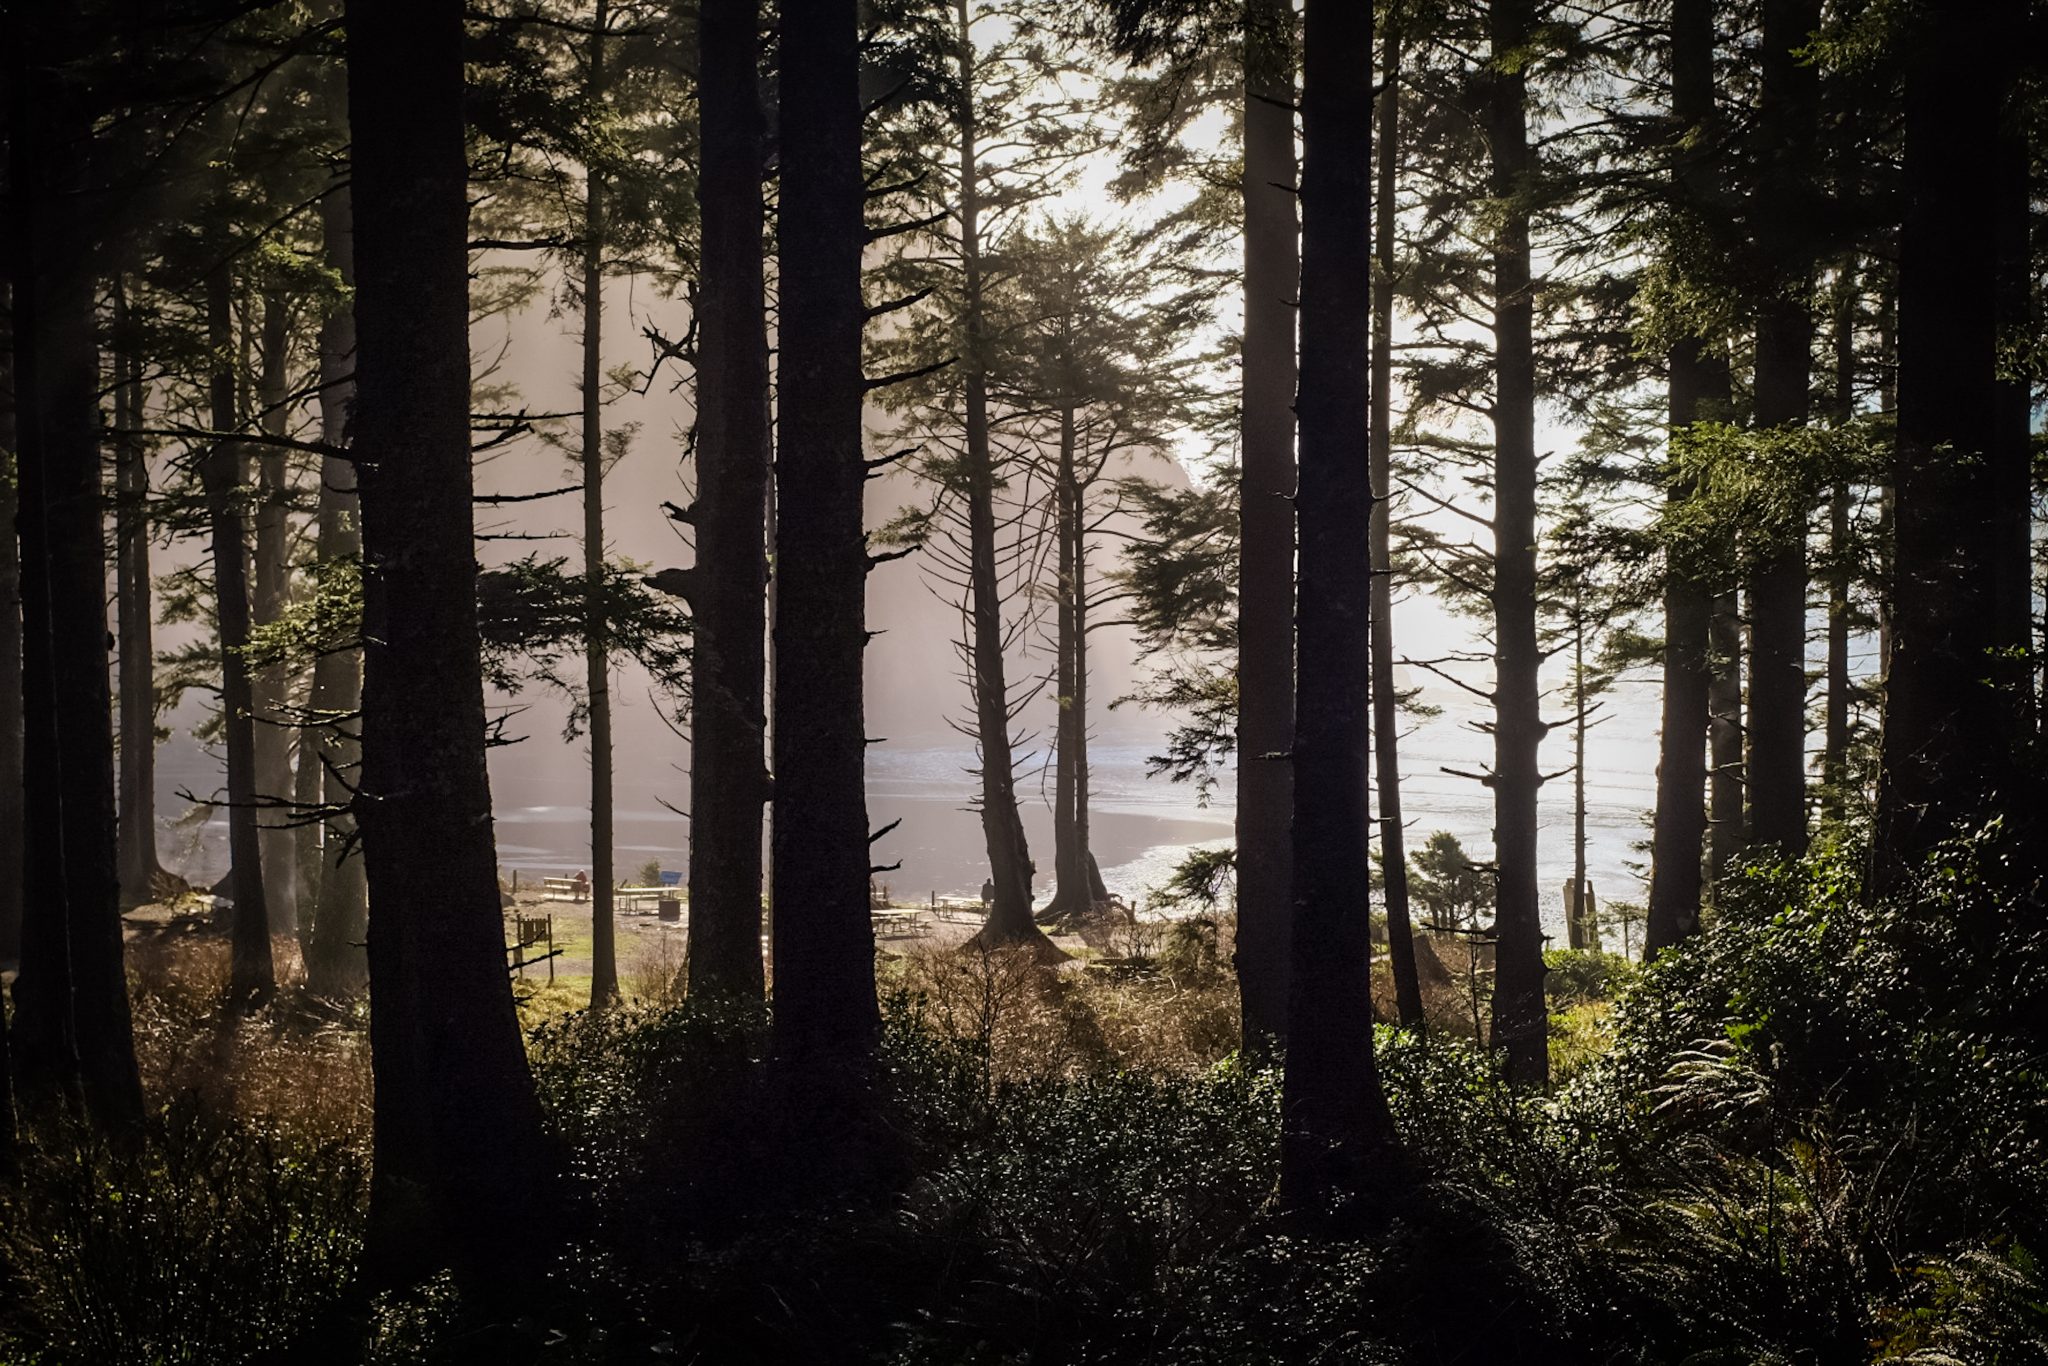 Pacific northwest forest scene with soft light opening on two trees in the center.